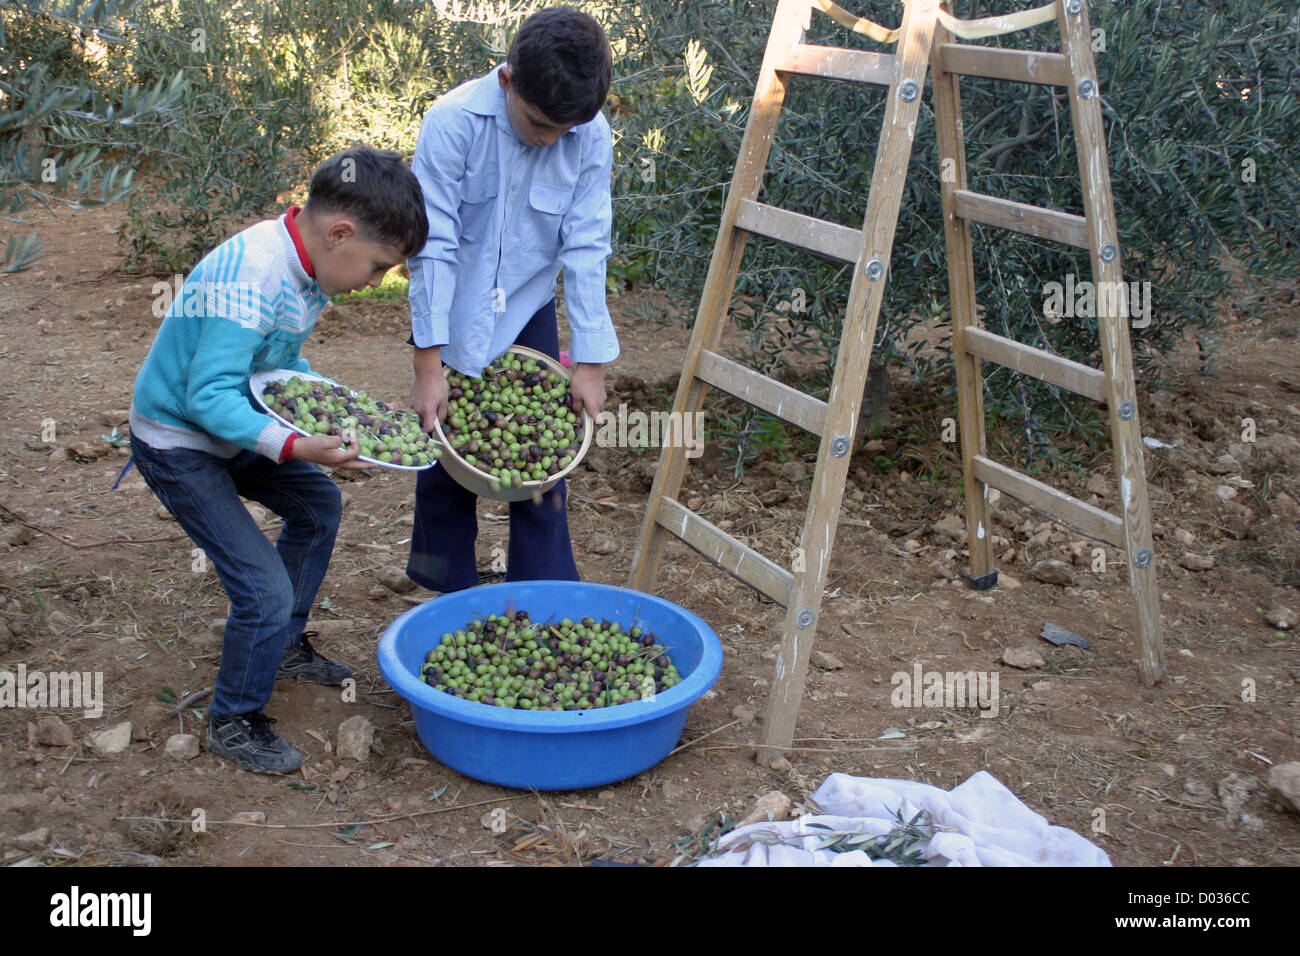 Nov. 15, 2012 - Hebron, West Bank, Palestinian Territory - Palestinian students from Jawad school take part in harvest olives in the West Bank city of Hebron on November 15, 2012. As Palestinians have marked Nov. 15 as their Independence Day since 1988, when the Palestine National Council unilaterally declared statehood in the West Bank and Gaza Strip  (Credit Image: © Najeh Hashlamoun/APA Images/ZUMAPRESS.com) Stock Photo